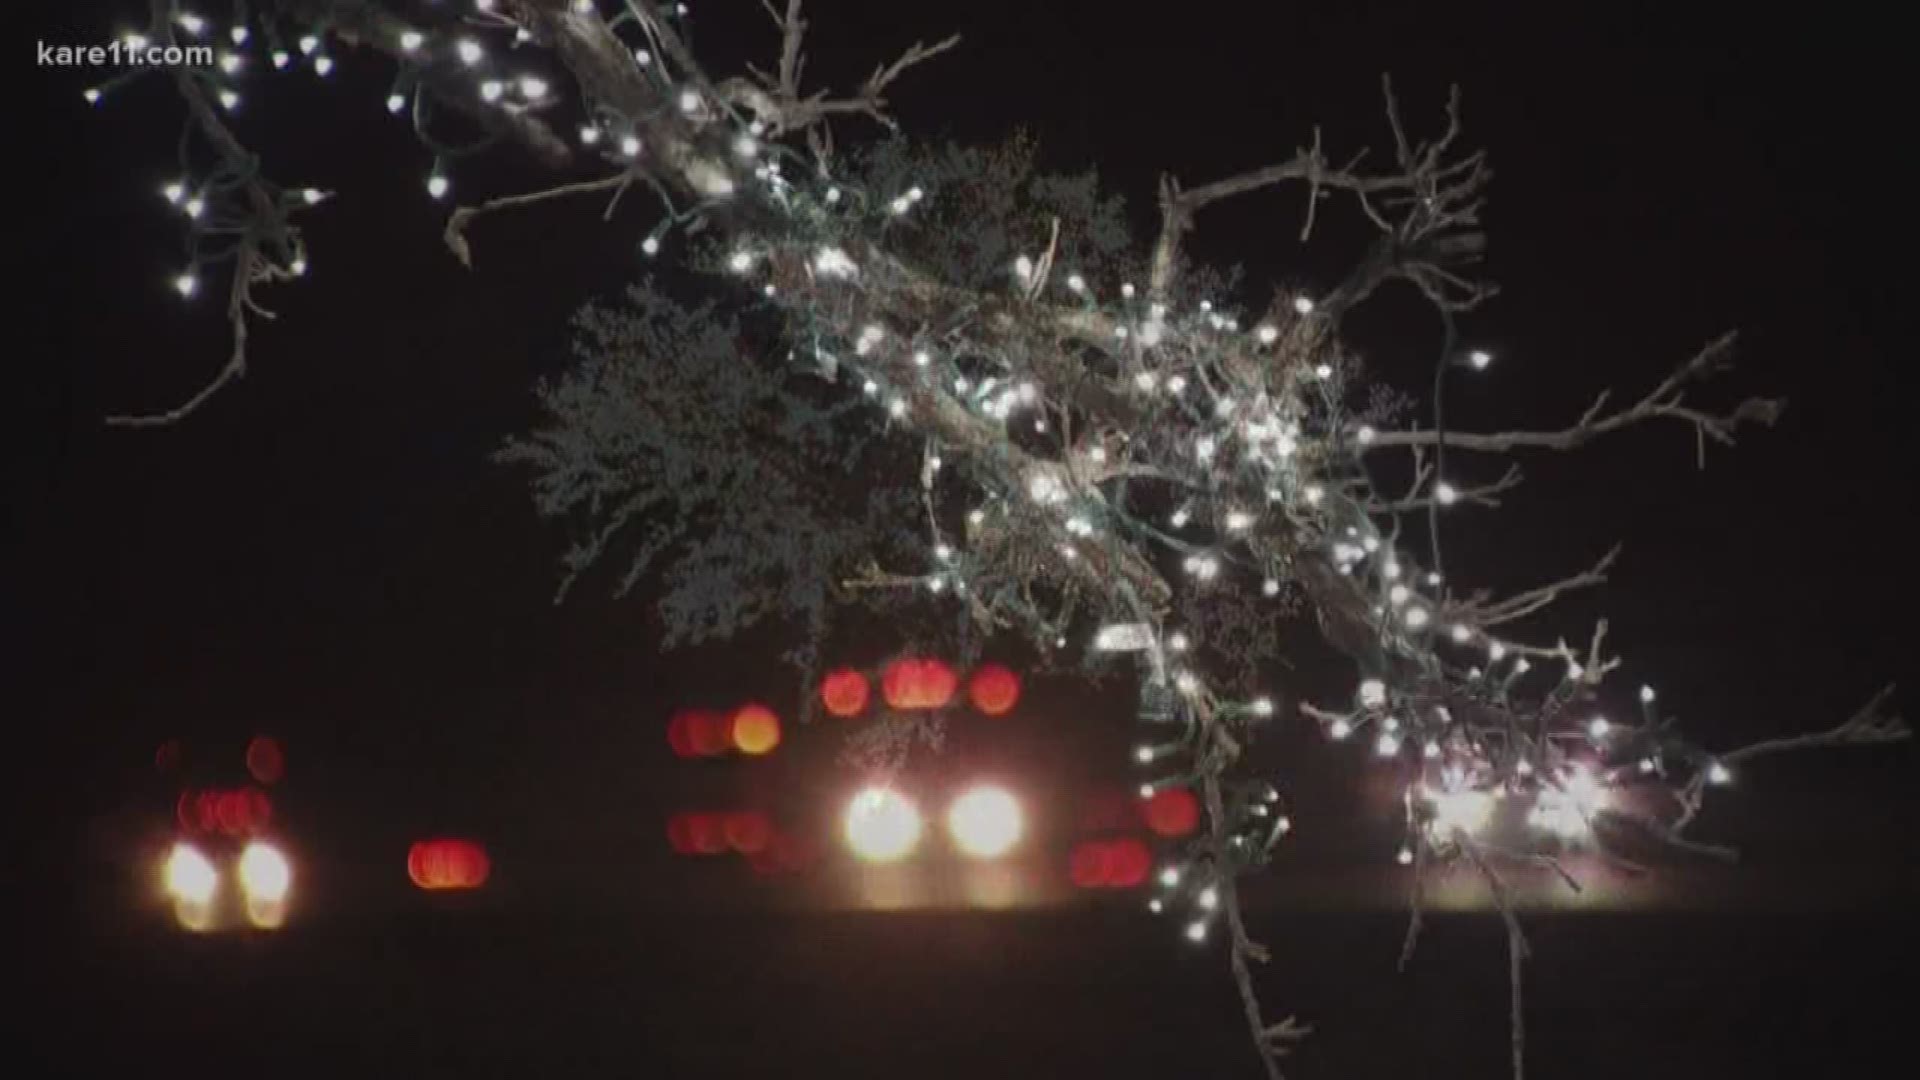 It's hard to miss a 40-foot oak tree adorned with 45,000 white lights.